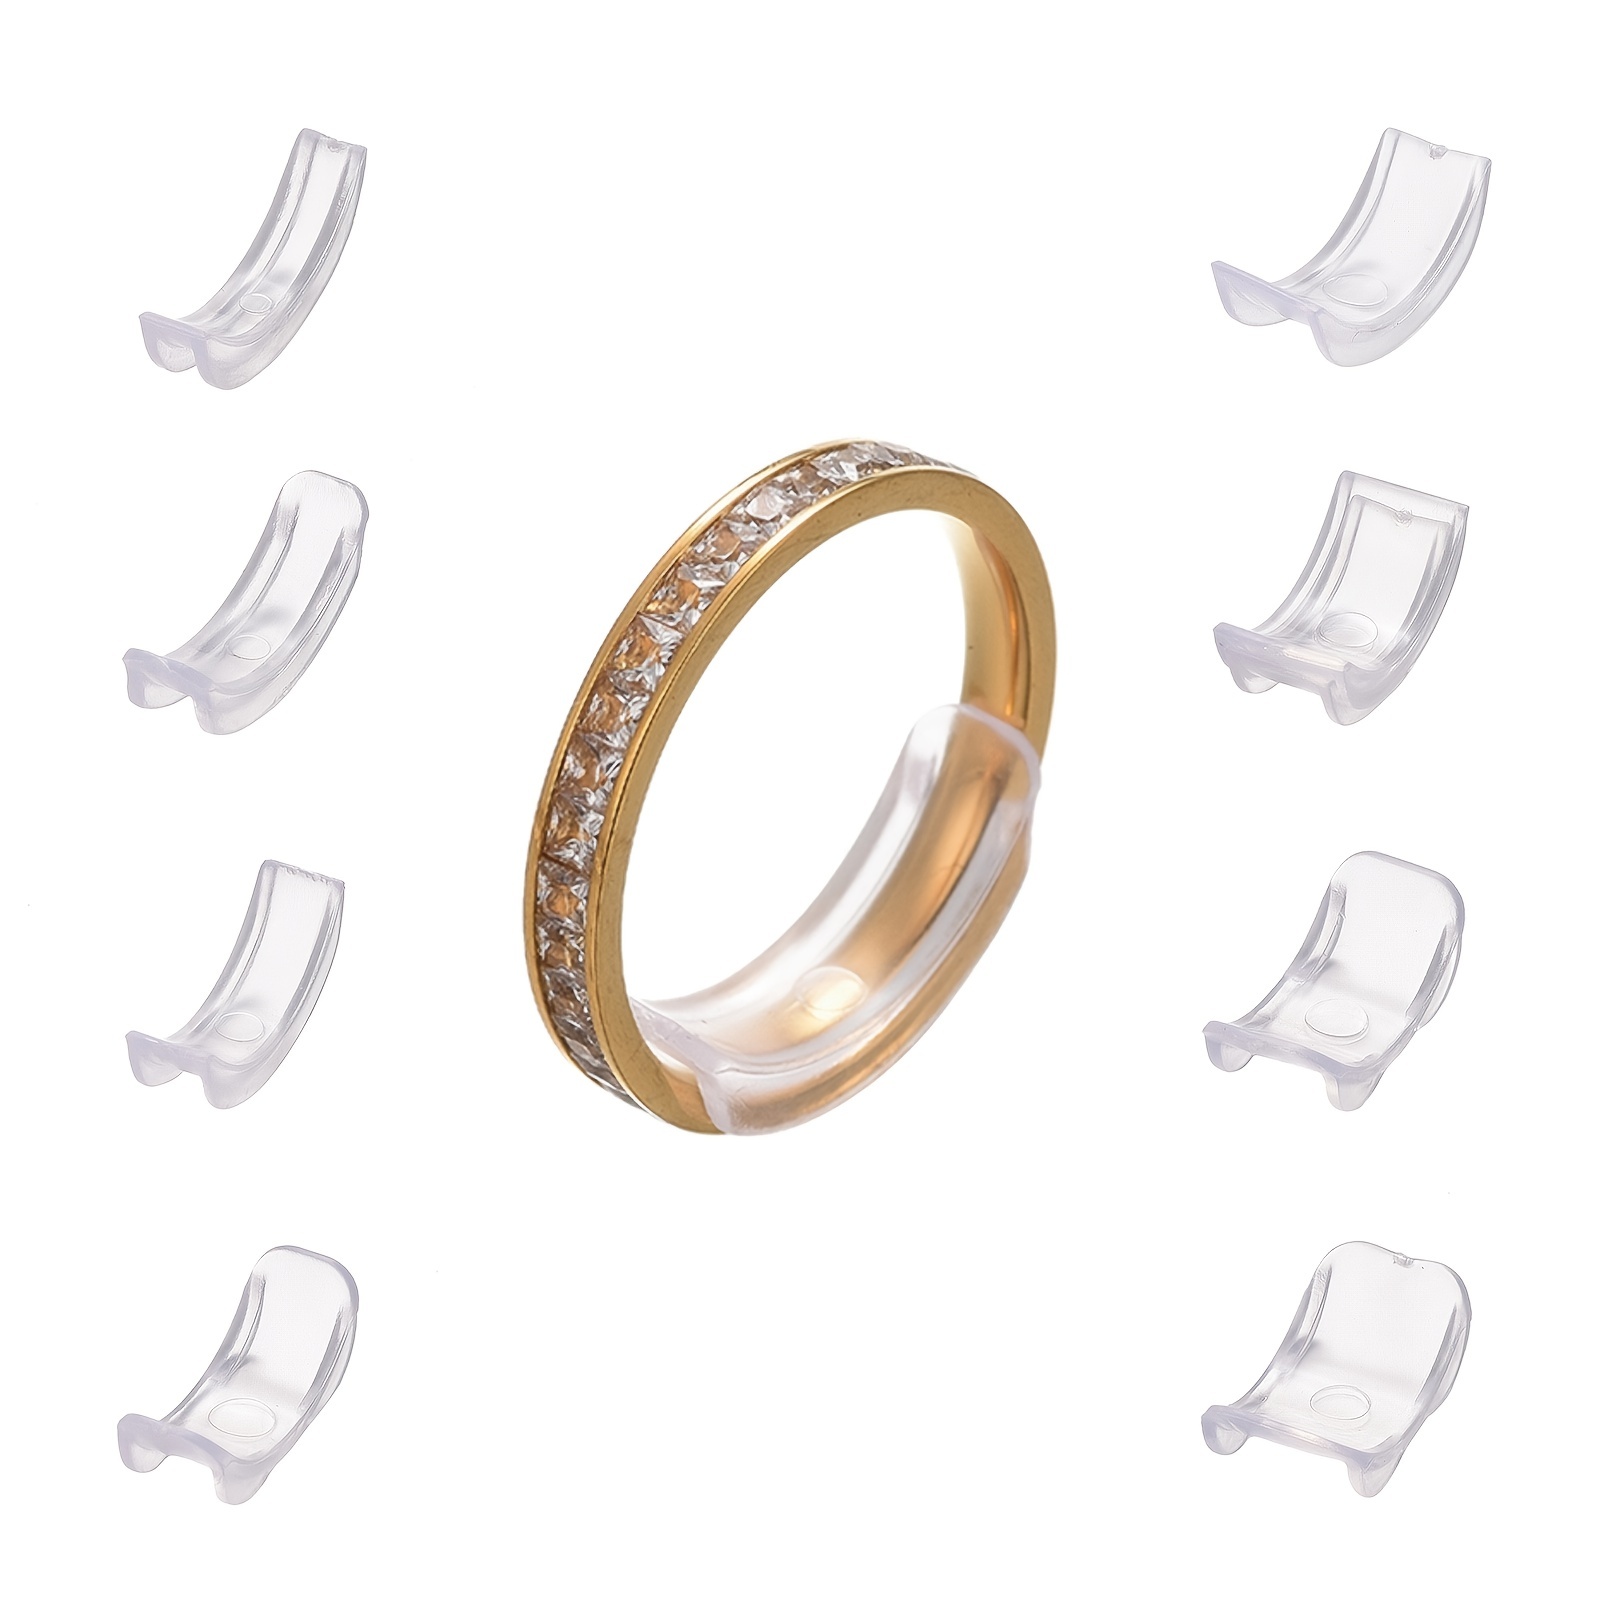 Invisible Ring Size Adjuster for Loose Rings Ring Adjuster Fit Any Rings Assorted Sizes of Ring Sizer